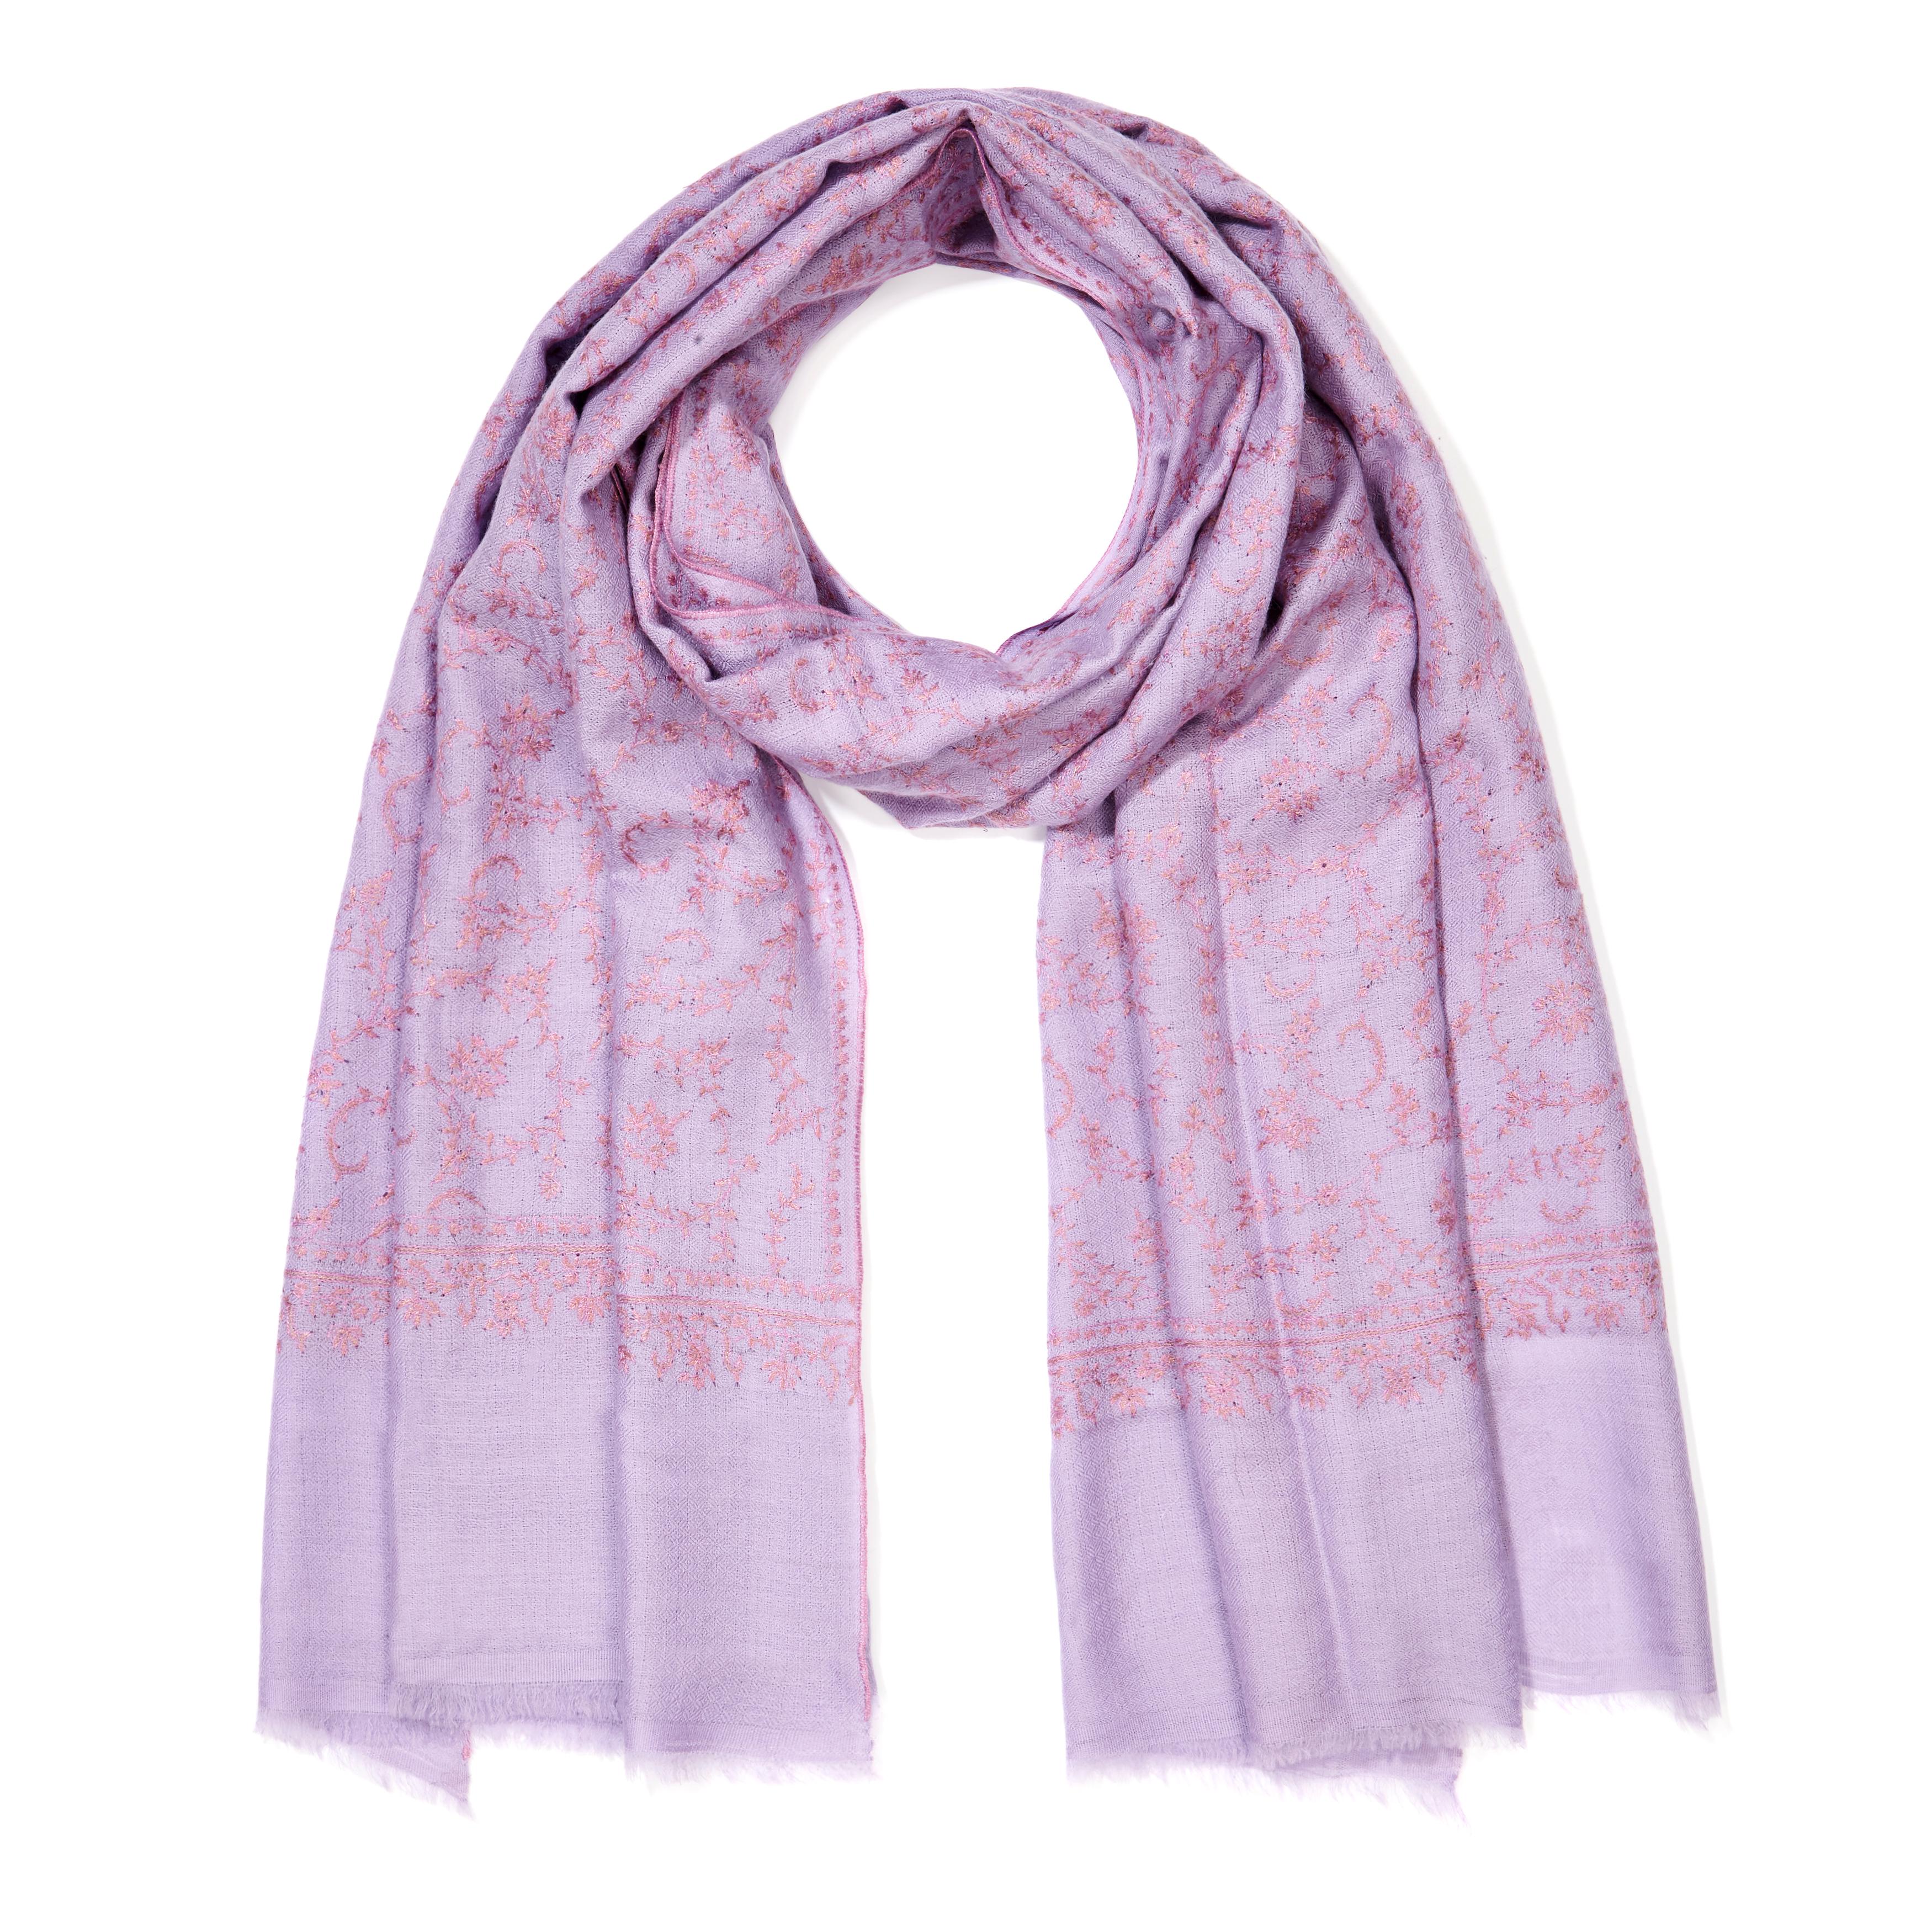 Hand Embroidered Cashmere Scarf in Lilac Made in Kashmir - Brand New 

Verheyen London’s shawl is spun from the finest embroidered woven in 100% cashmere from Kashmir.  The embroidery can take up to 1 year to embroider these shawls and each one is